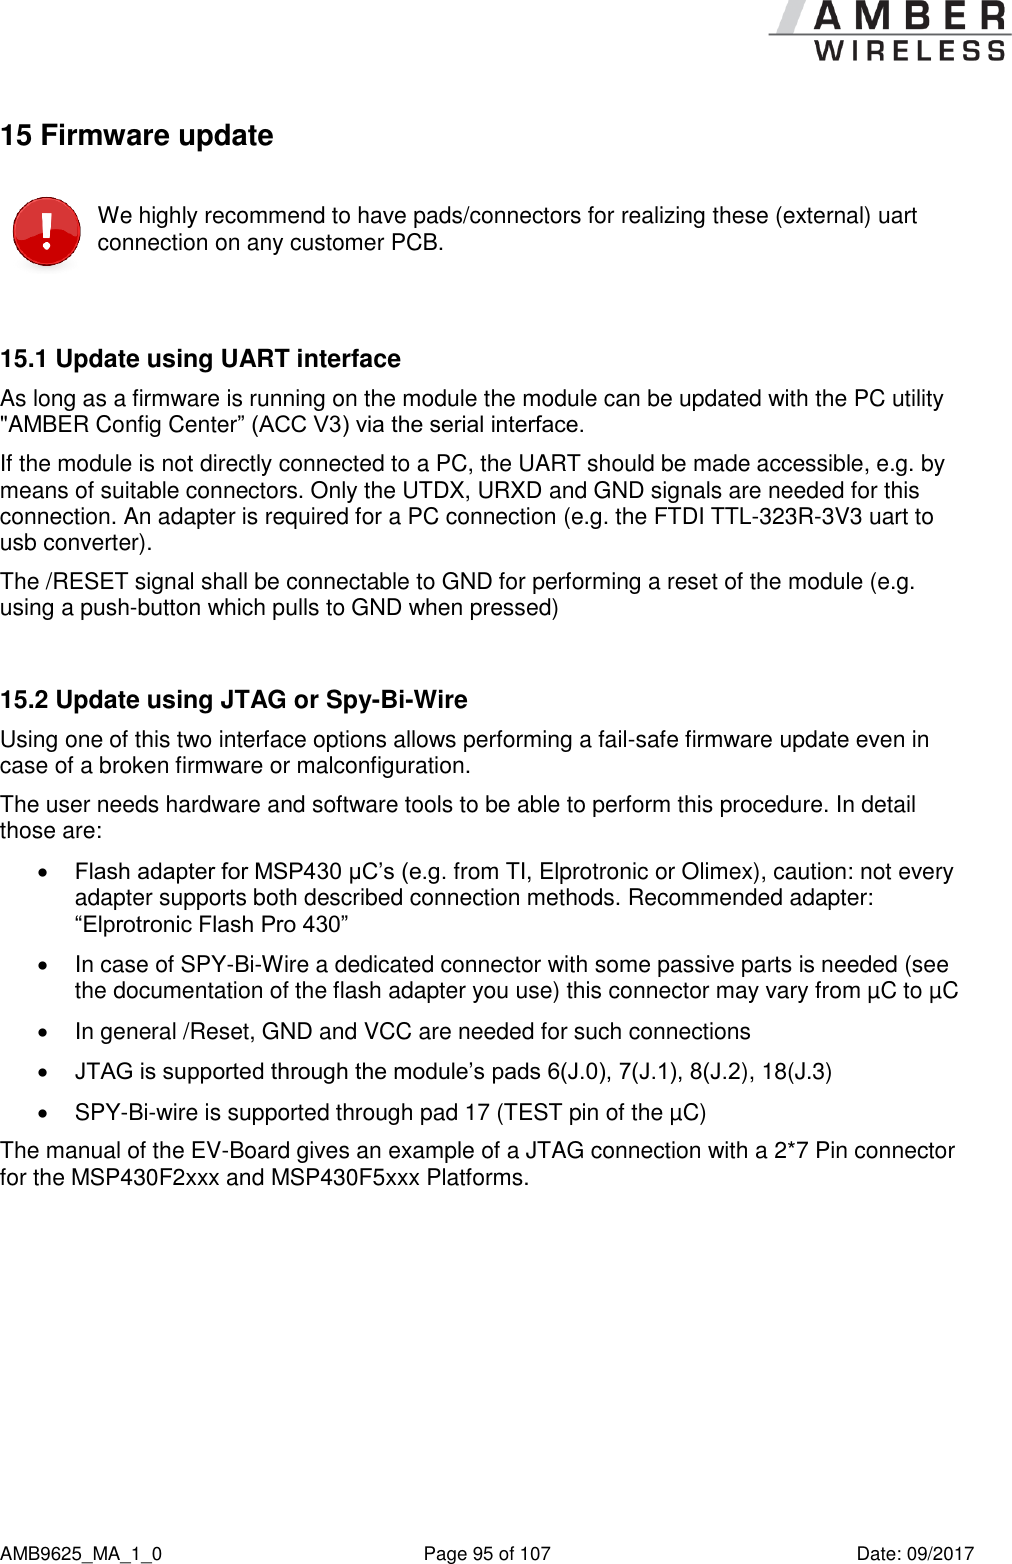      AMB9625_MA_1_0  Page 95 of 107  Date: 09/2017 15 Firmware update  We highly recommend to have pads/connectors for realizing these (external) uart connection on any customer PCB.  15.1 Update using UART interface As long as a firmware is running on the module the module can be updated with the PC utility &quot;AMBER Config Center” (ACC V3) via the serial interface. If the module is not directly connected to a PC, the UART should be made accessible, e.g. by means of suitable connectors. Only the UTDX, URXD and GND signals are needed for this connection. An adapter is required for a PC connection (e.g. the FTDI TTL-323R-3V3 uart to usb converter). The /RESET signal shall be connectable to GND for performing a reset of the module (e.g. using a push-button which pulls to GND when pressed)  15.2 Update using JTAG or Spy-Bi-Wire Using one of this two interface options allows performing a fail-safe firmware update even in case of a broken firmware or malconfiguration. The user needs hardware and software tools to be able to perform this procedure. In detail those are:  Flash adapter for MSP430 µC’s (e.g. from TI, Elprotronic or Olimex), caution: not every adapter supports both described connection methods. Recommended adapter: “Elprotronic Flash Pro 430”   In case of SPY-Bi-Wire a dedicated connector with some passive parts is needed (see the documentation of the flash adapter you use) this connector may vary from µC to µC   In general /Reset, GND and VCC are needed for such connections  JTAG is supported through the module’s pads 6(J.0), 7(J.1), 8(J.2), 18(J.3)  SPY-Bi-wire is supported through pad 17 (TEST pin of the µC) The manual of the EV-Board gives an example of a JTAG connection with a 2*7 Pin connector for the MSP430F2xxx and MSP430F5xxx Platforms.    